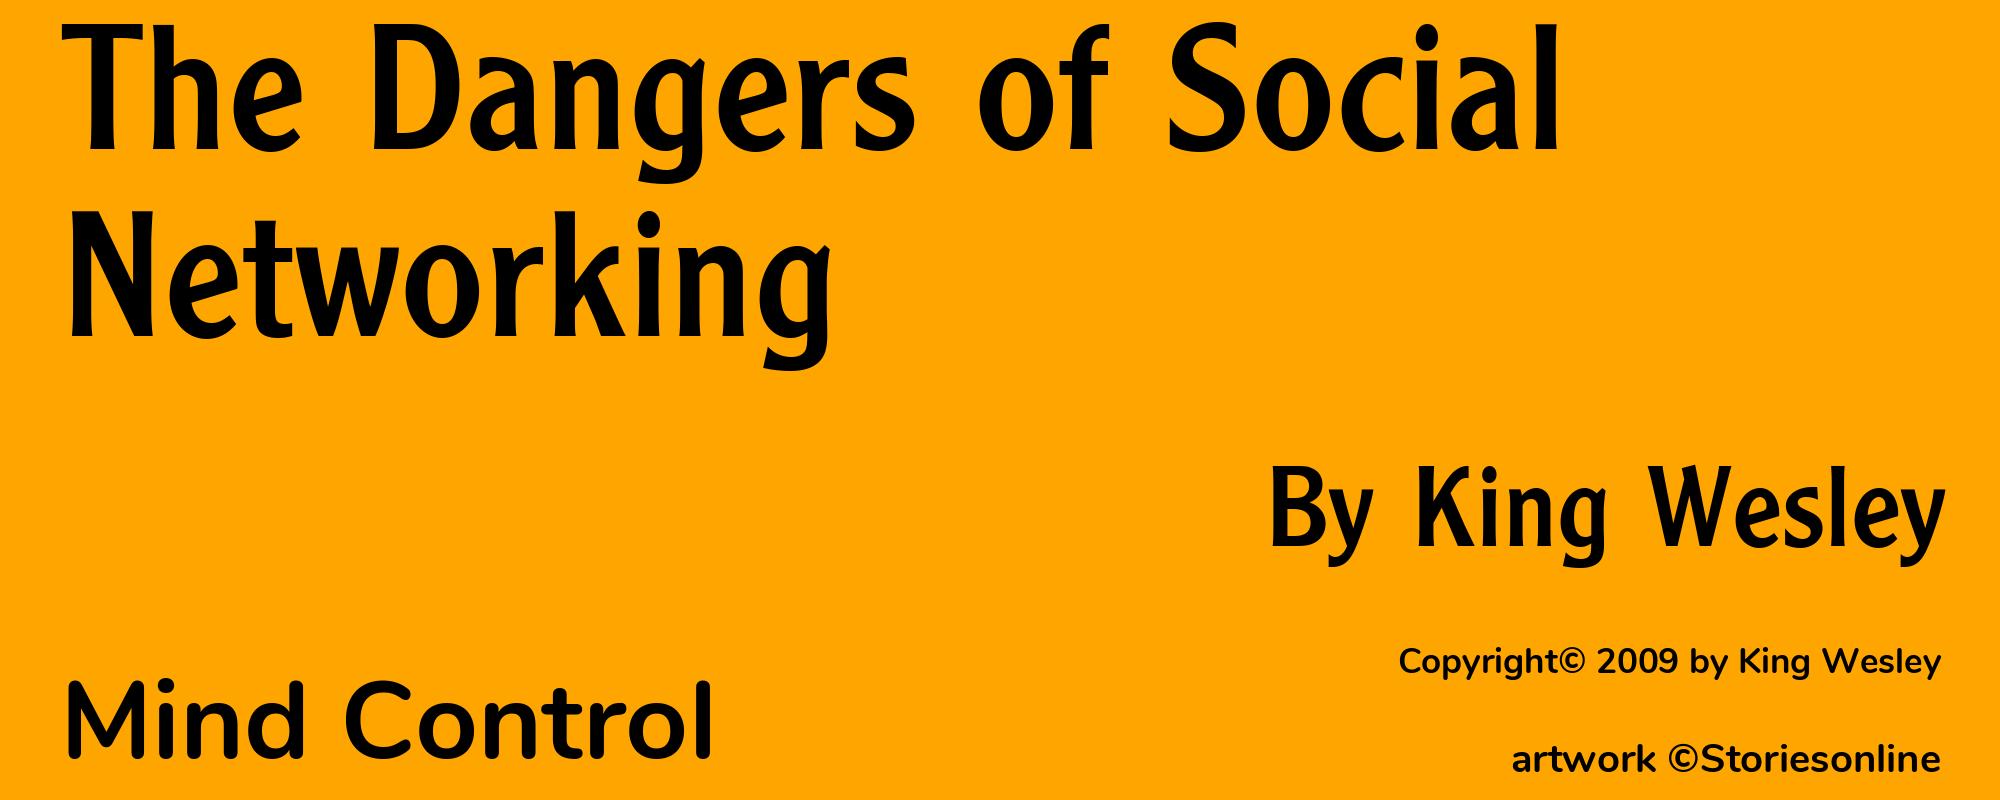 The Dangers of Social Networking - Cover